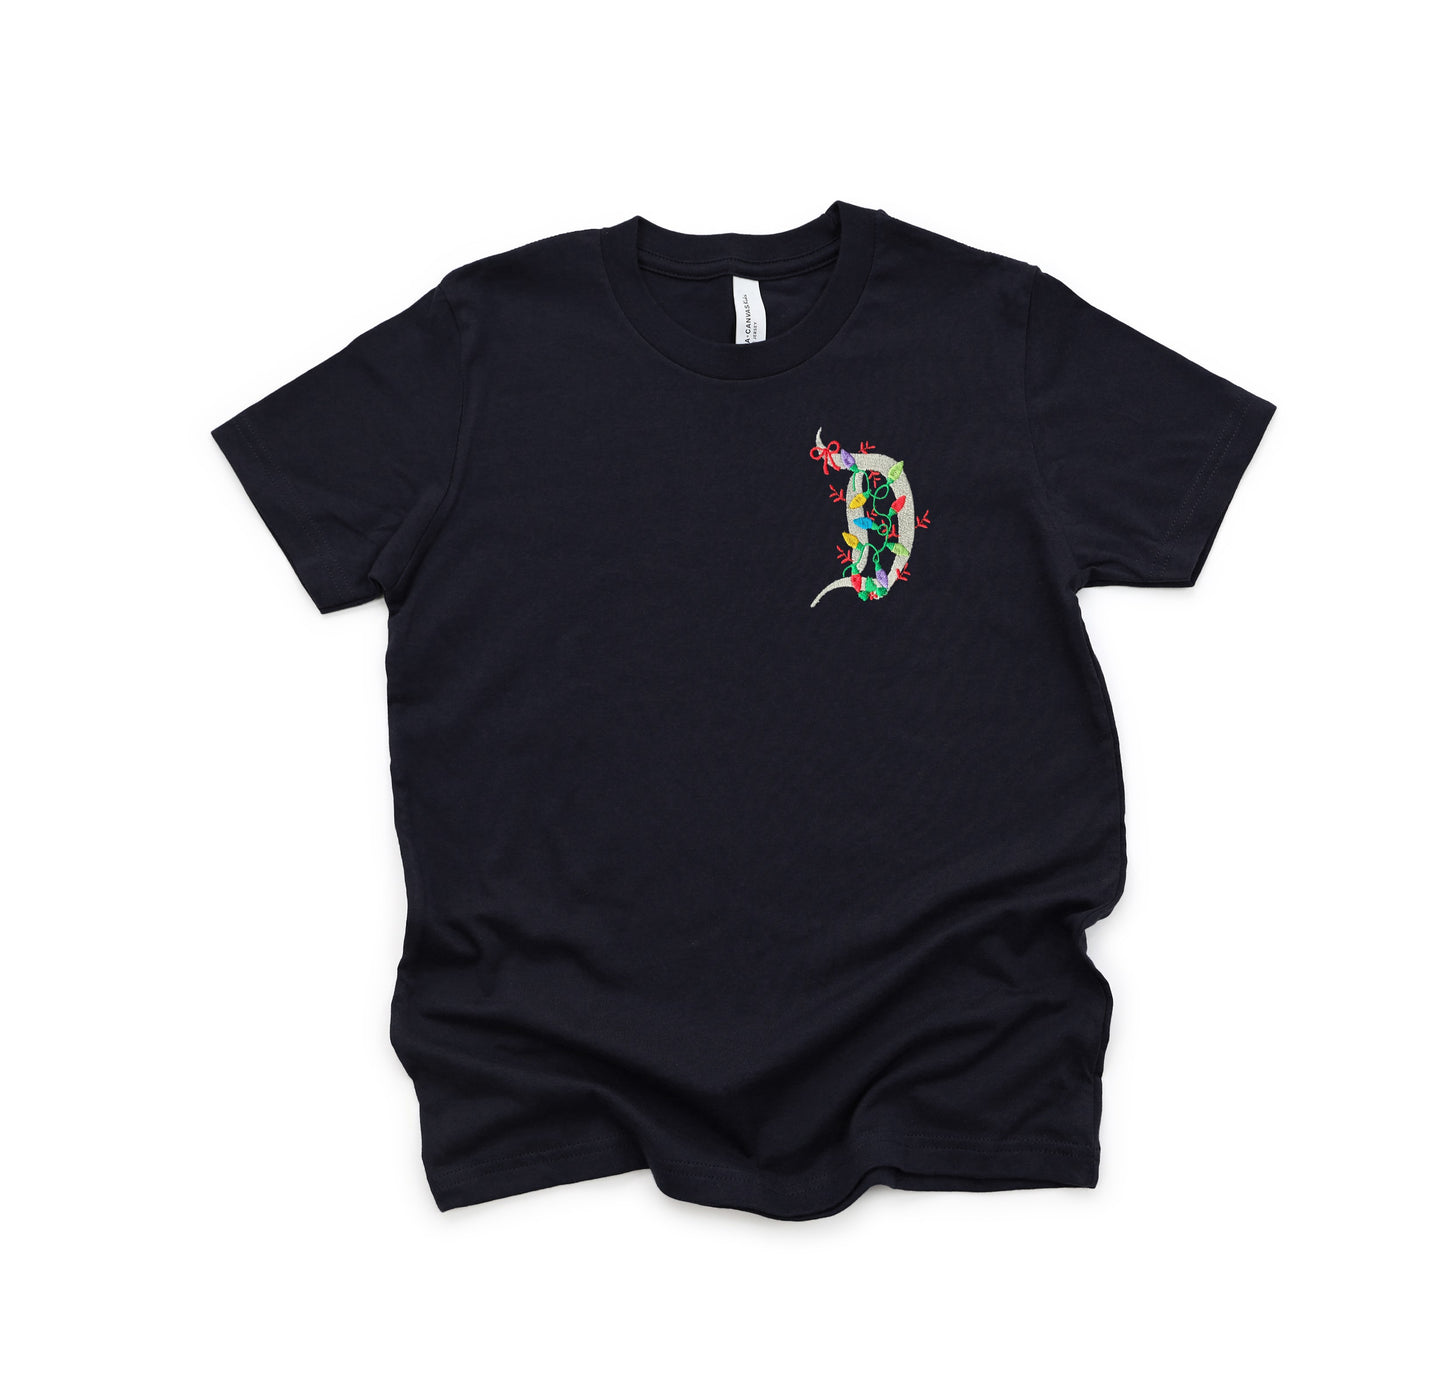 Disneyland D Christmas Lights Youth Embroidered Tee